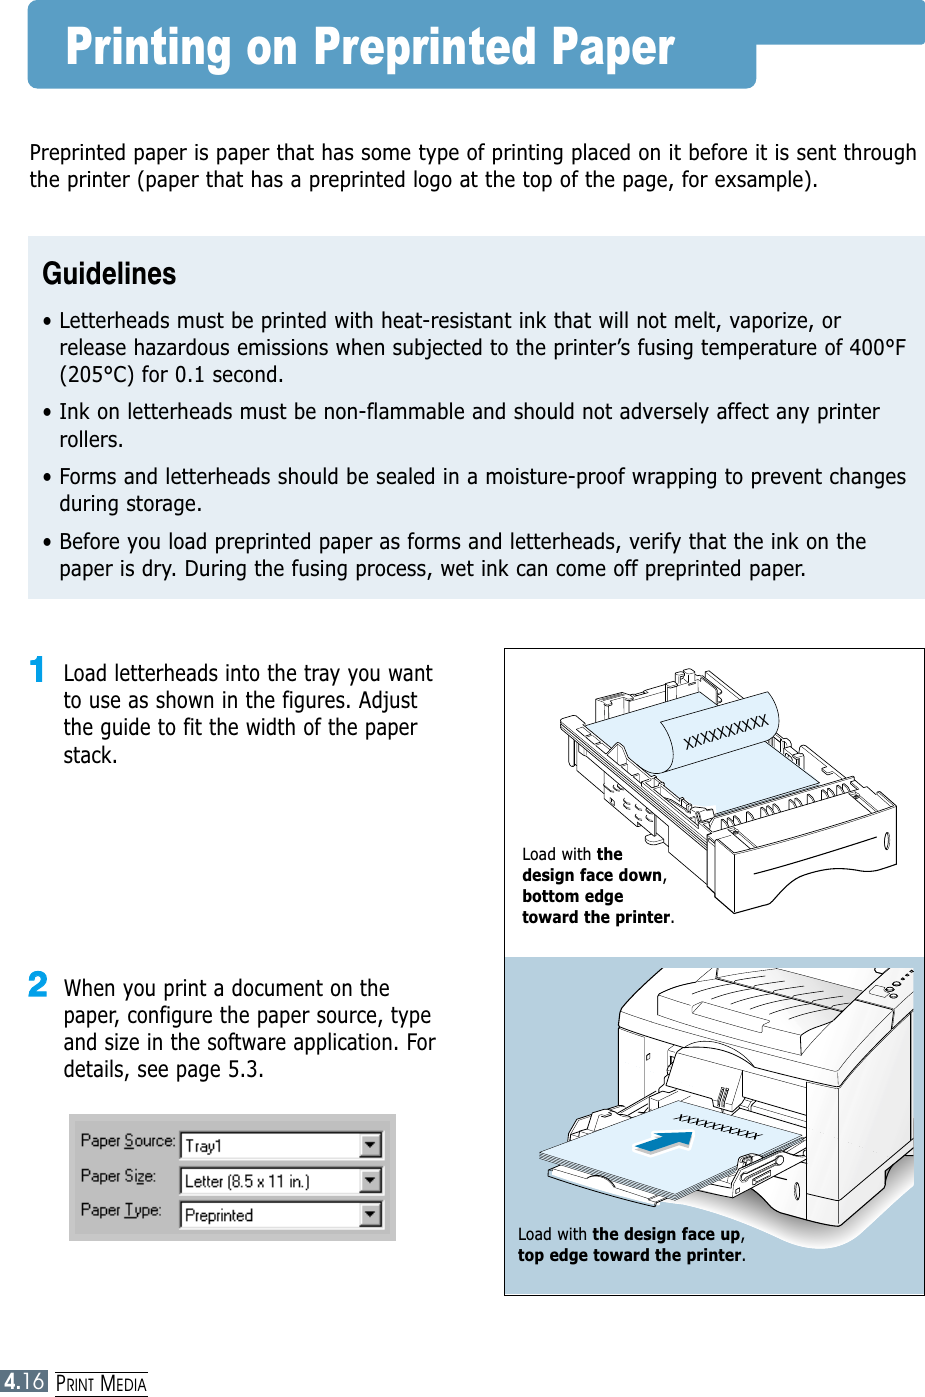 PRINT MEDIA4.16Printing on Preprinted PaperXXXXXXXXXX11Load letterheads into the tray you wantto use as shown in the figures. Adjustthe guide to fit the width of the paperstack. 22When you print a document on thepaper, configure the paper source, typeand size in the software application. Fordetails, see page 5.3.Preprinted paper is paper that has some type of printing placed on it before it is sent throughthe printer (paper that has a preprinted logo at the top of the page, for exsample).Guidelines• Letterheads must be printed with heat-resistant ink that will not melt, vaporize, orrelease hazardous emissions when subjected to the printer’s fusing temperature of 400°F(205°C) for 0.1 second.• Ink on letterheads must be non-flammable and should not adversely affect any printerrollers.• Forms and letterheads should be sealed in a moisture-proof wrapping to prevent changesduring storage.• Before you load preprinted paper as forms and letterheads, verify that the ink on thepaper is dry. During the fusing process, wet ink can come off preprinted paper.Load with the design face down,bottom edge toward the printer.Load with the design face up, top edge toward the printer.